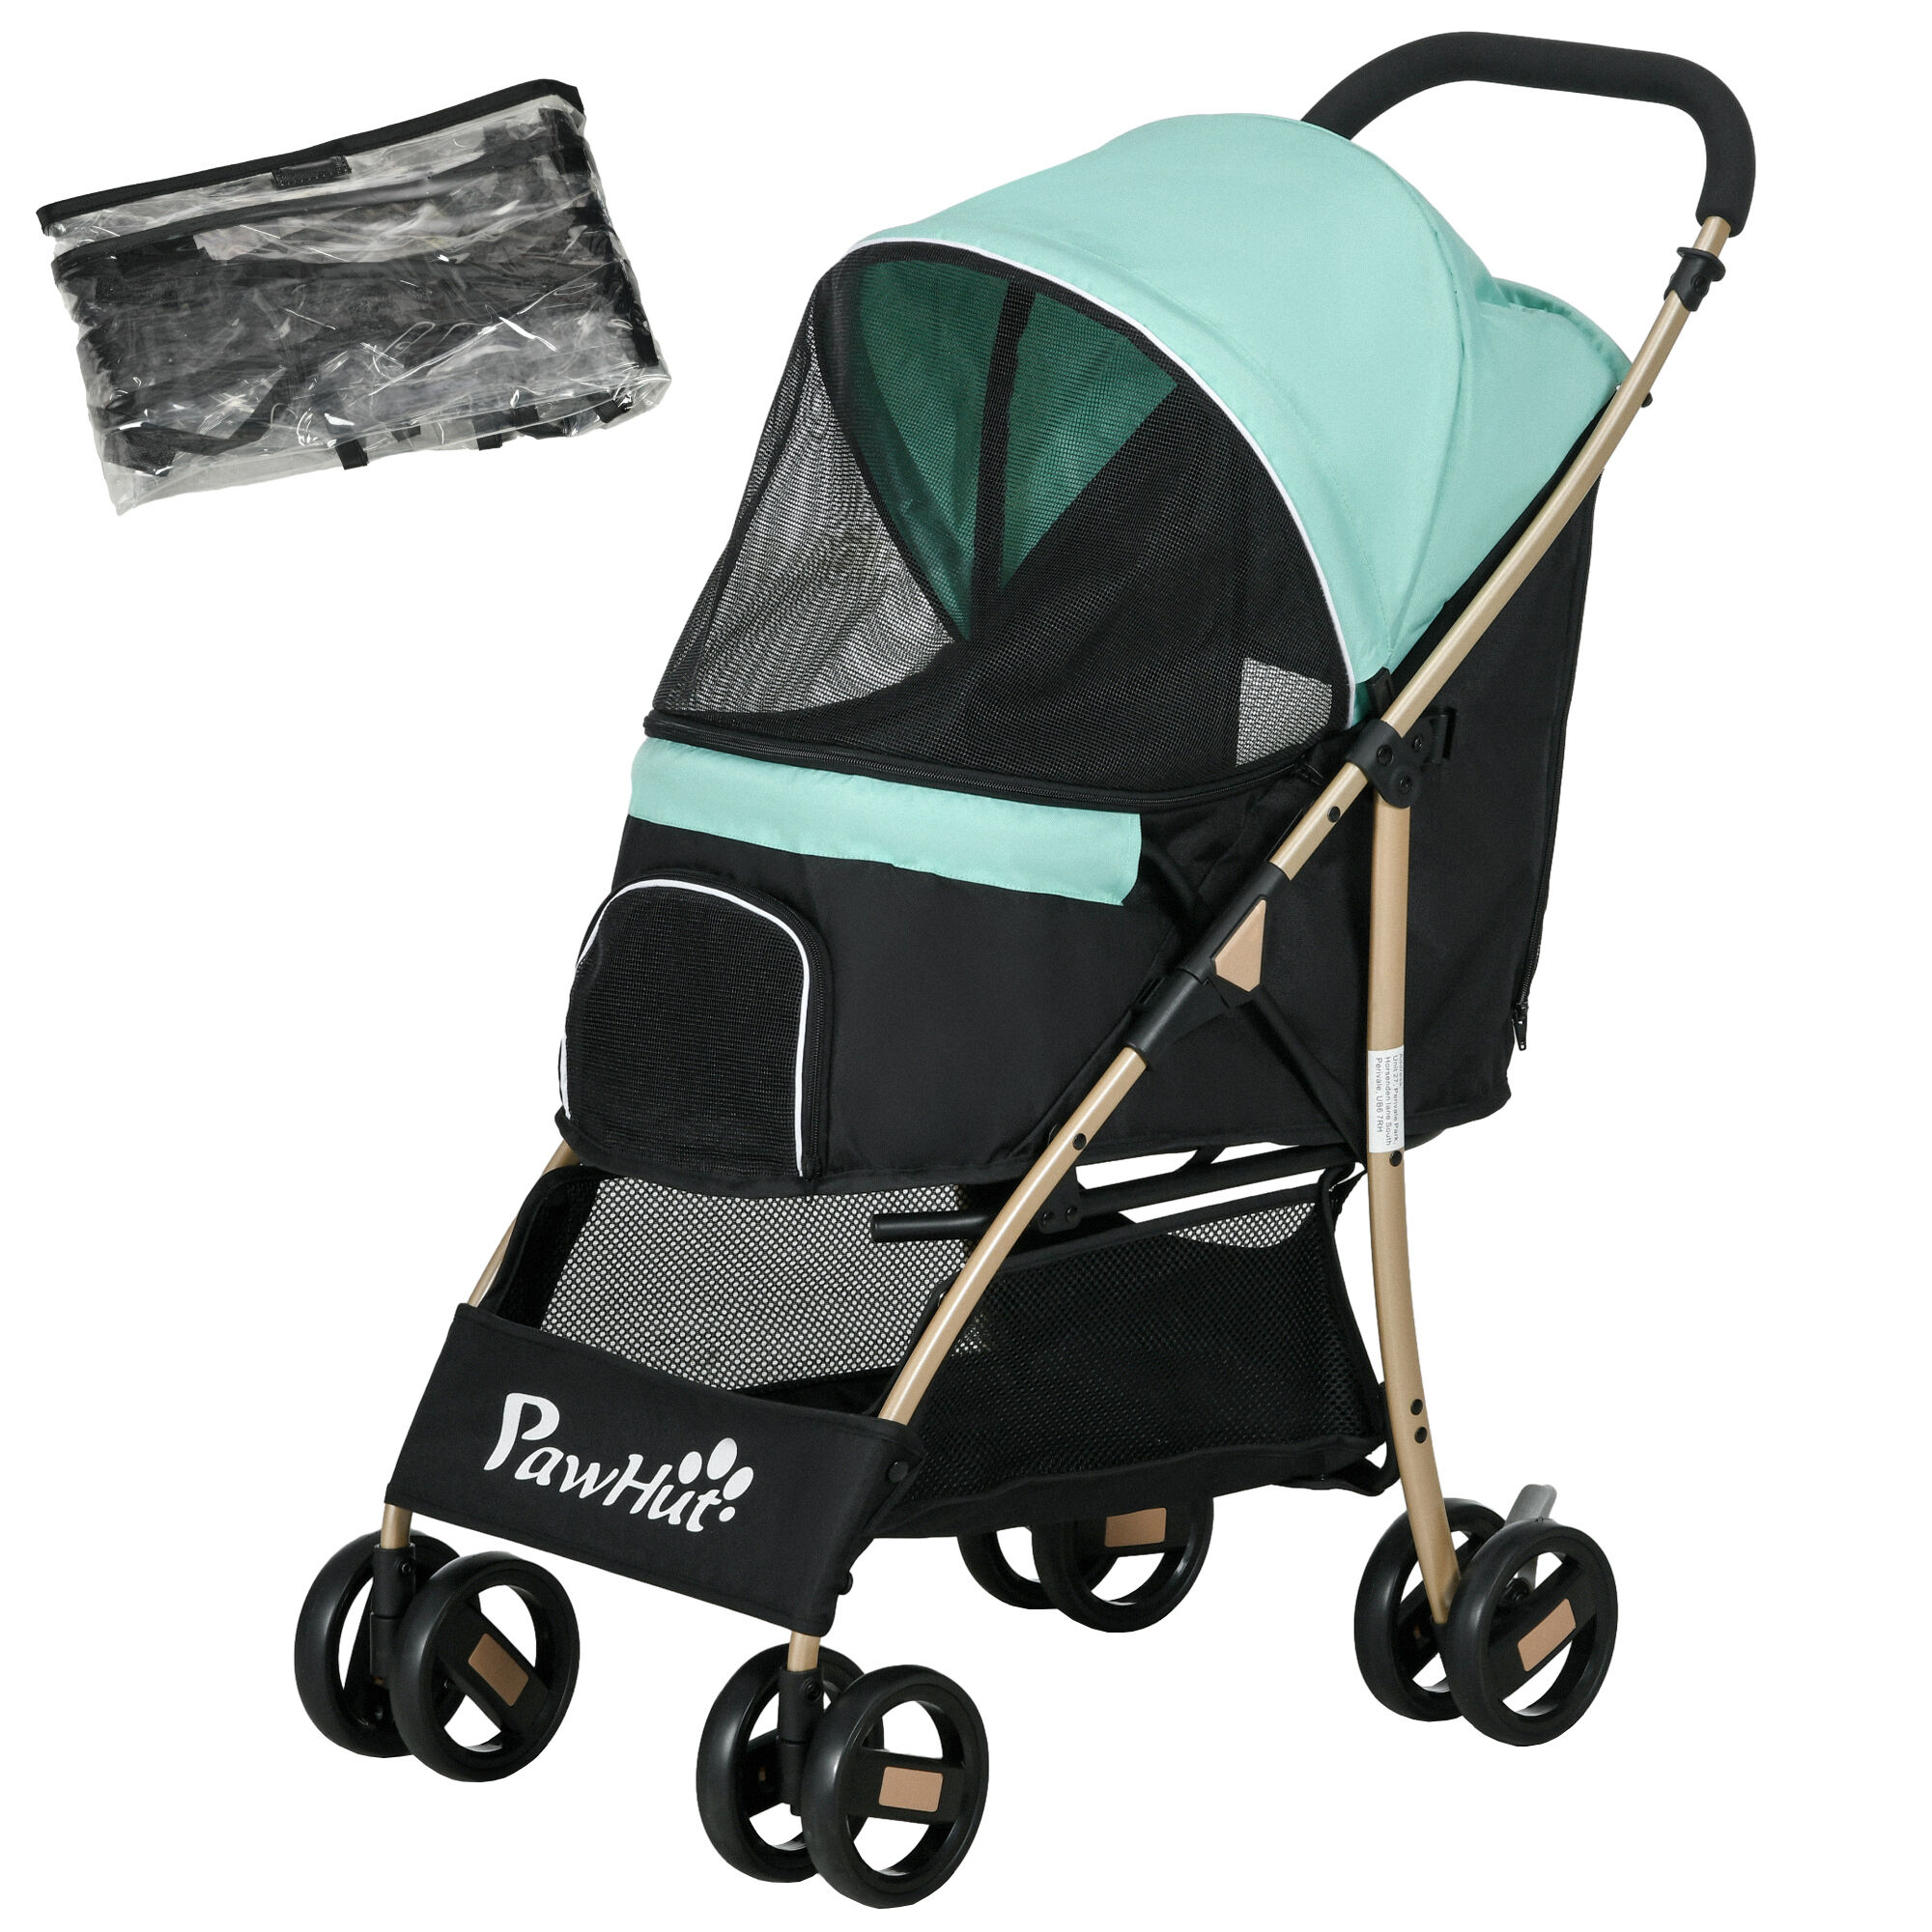 PawHut Pet Stroller for Small Dogs, Durable Oxford Fabric, with Rain Cover, Lightweight & Portable, Vibrant Green